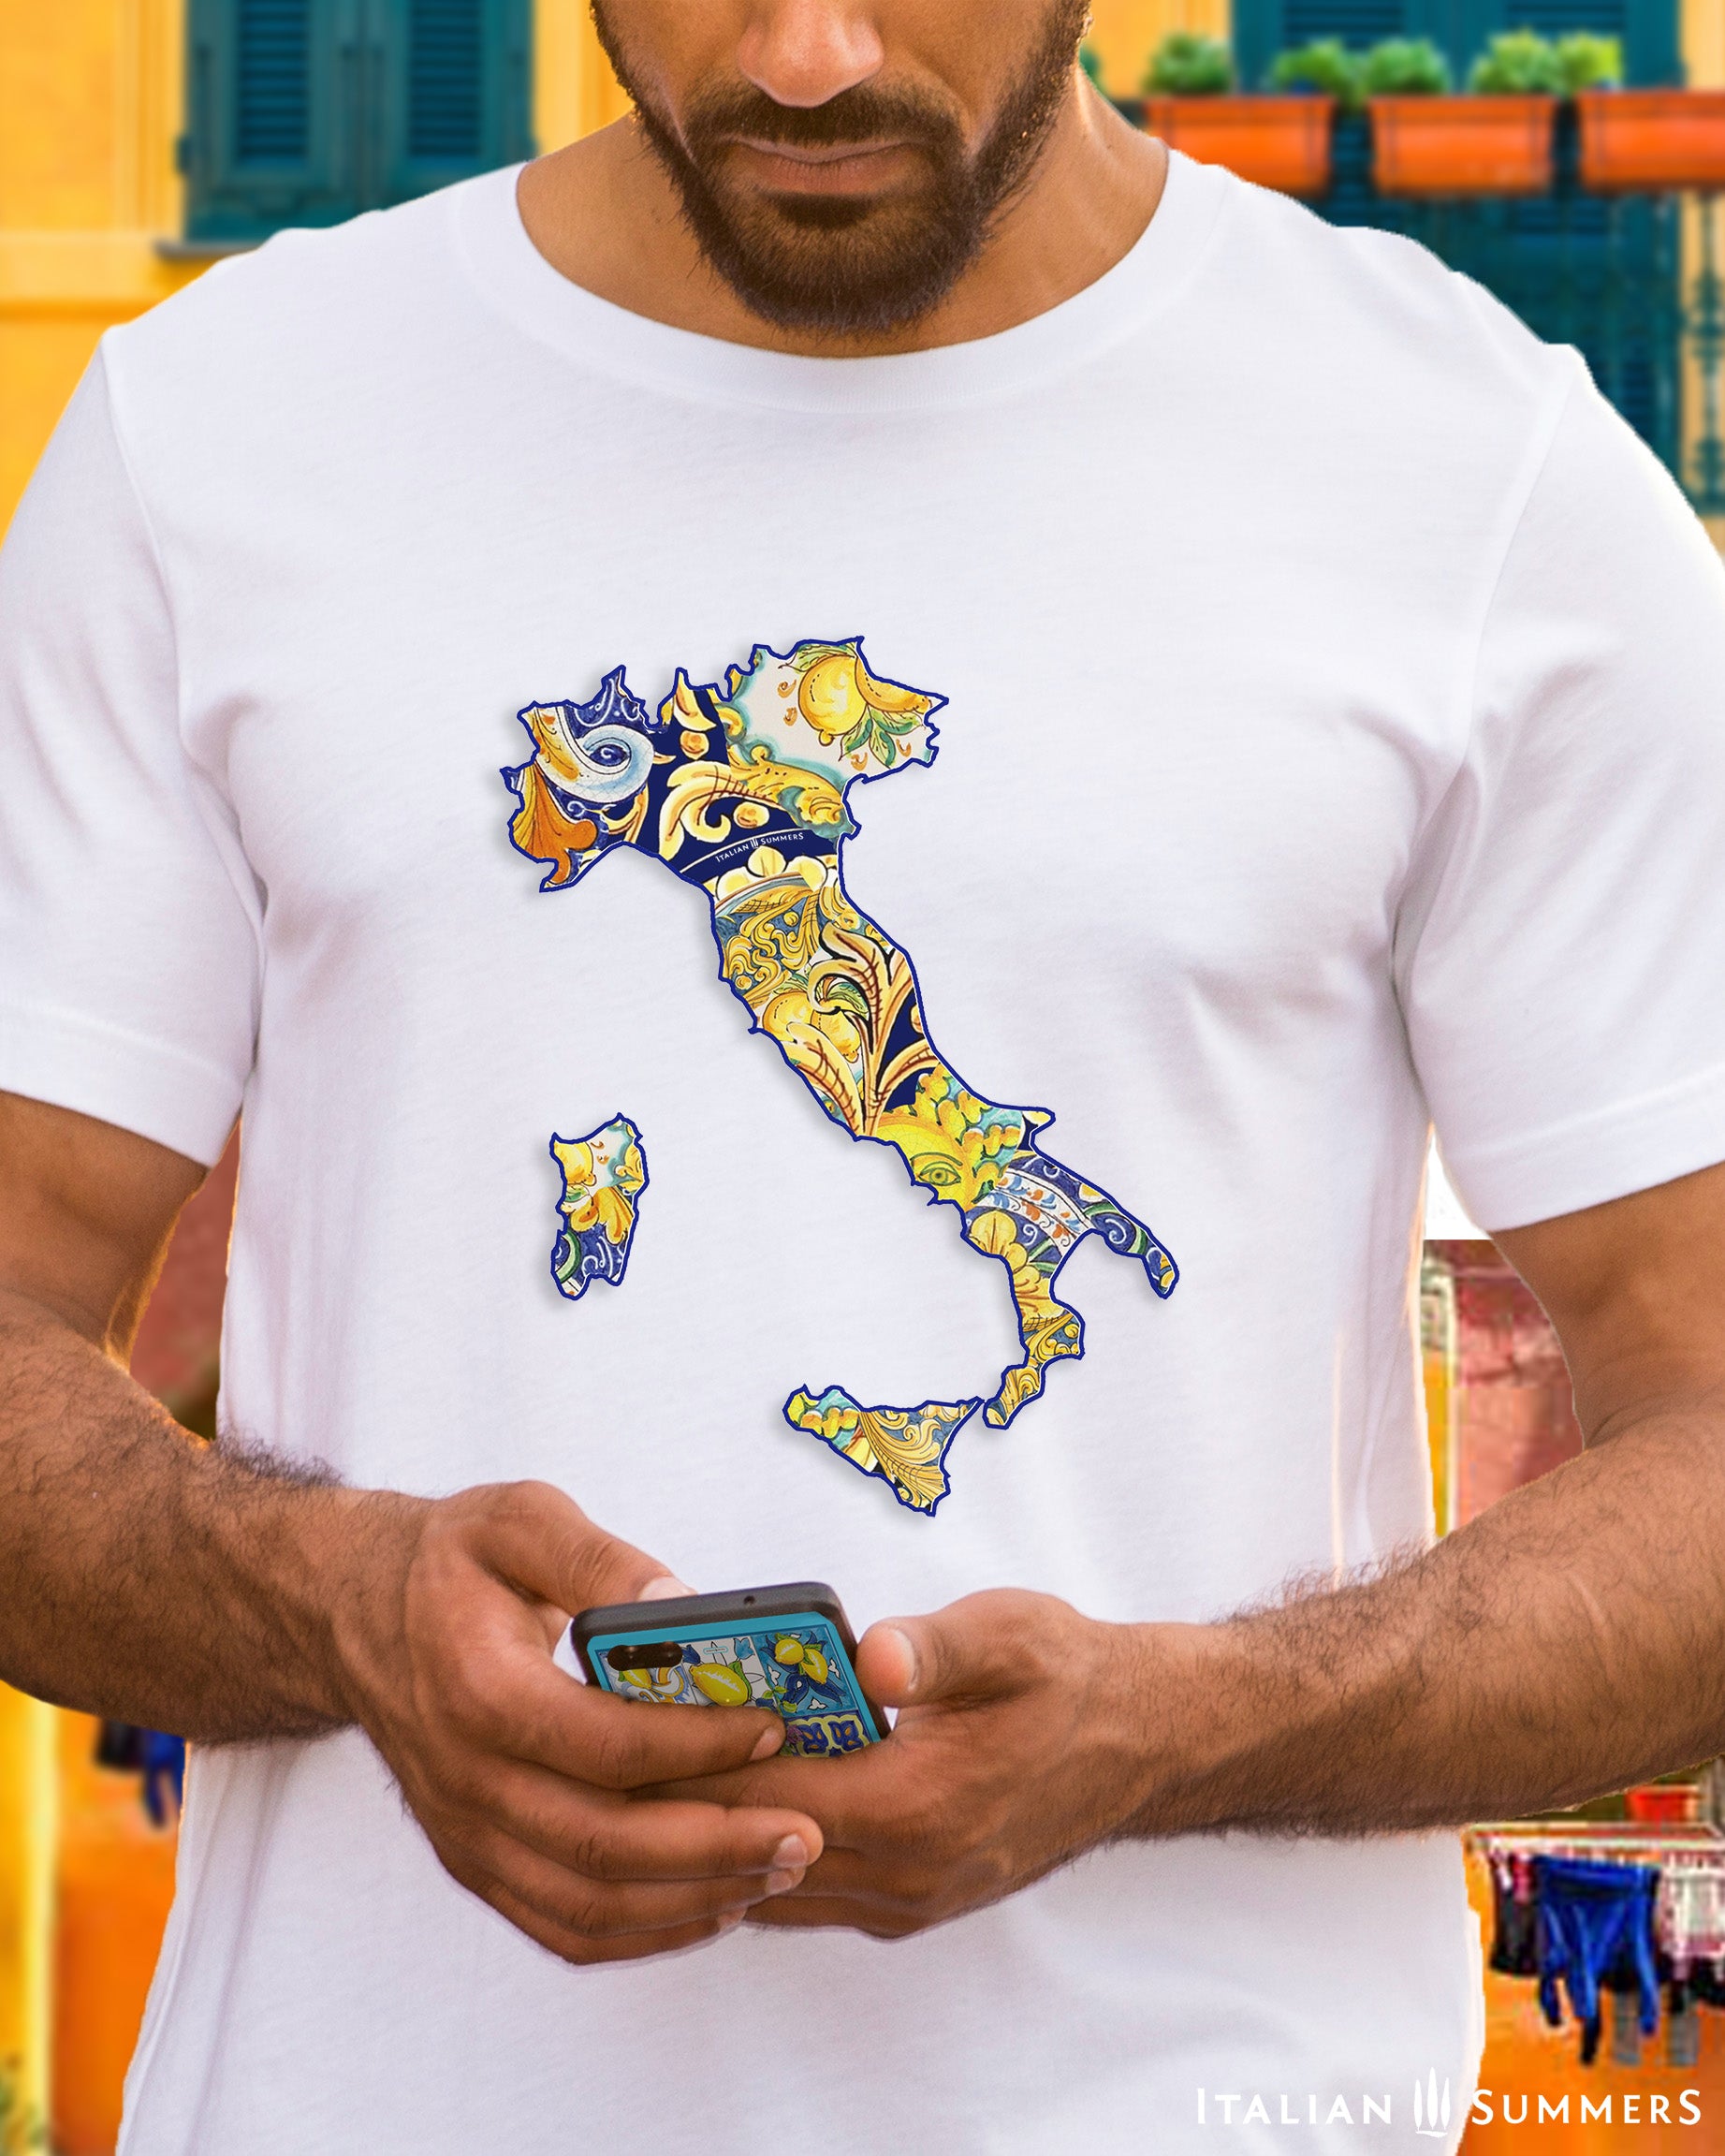 An Italy-inspired cotton Unisex crew neck T shirt with a print of the county of Italy composed of Italian maiolica tile decorations , an original design made by Italian Summers